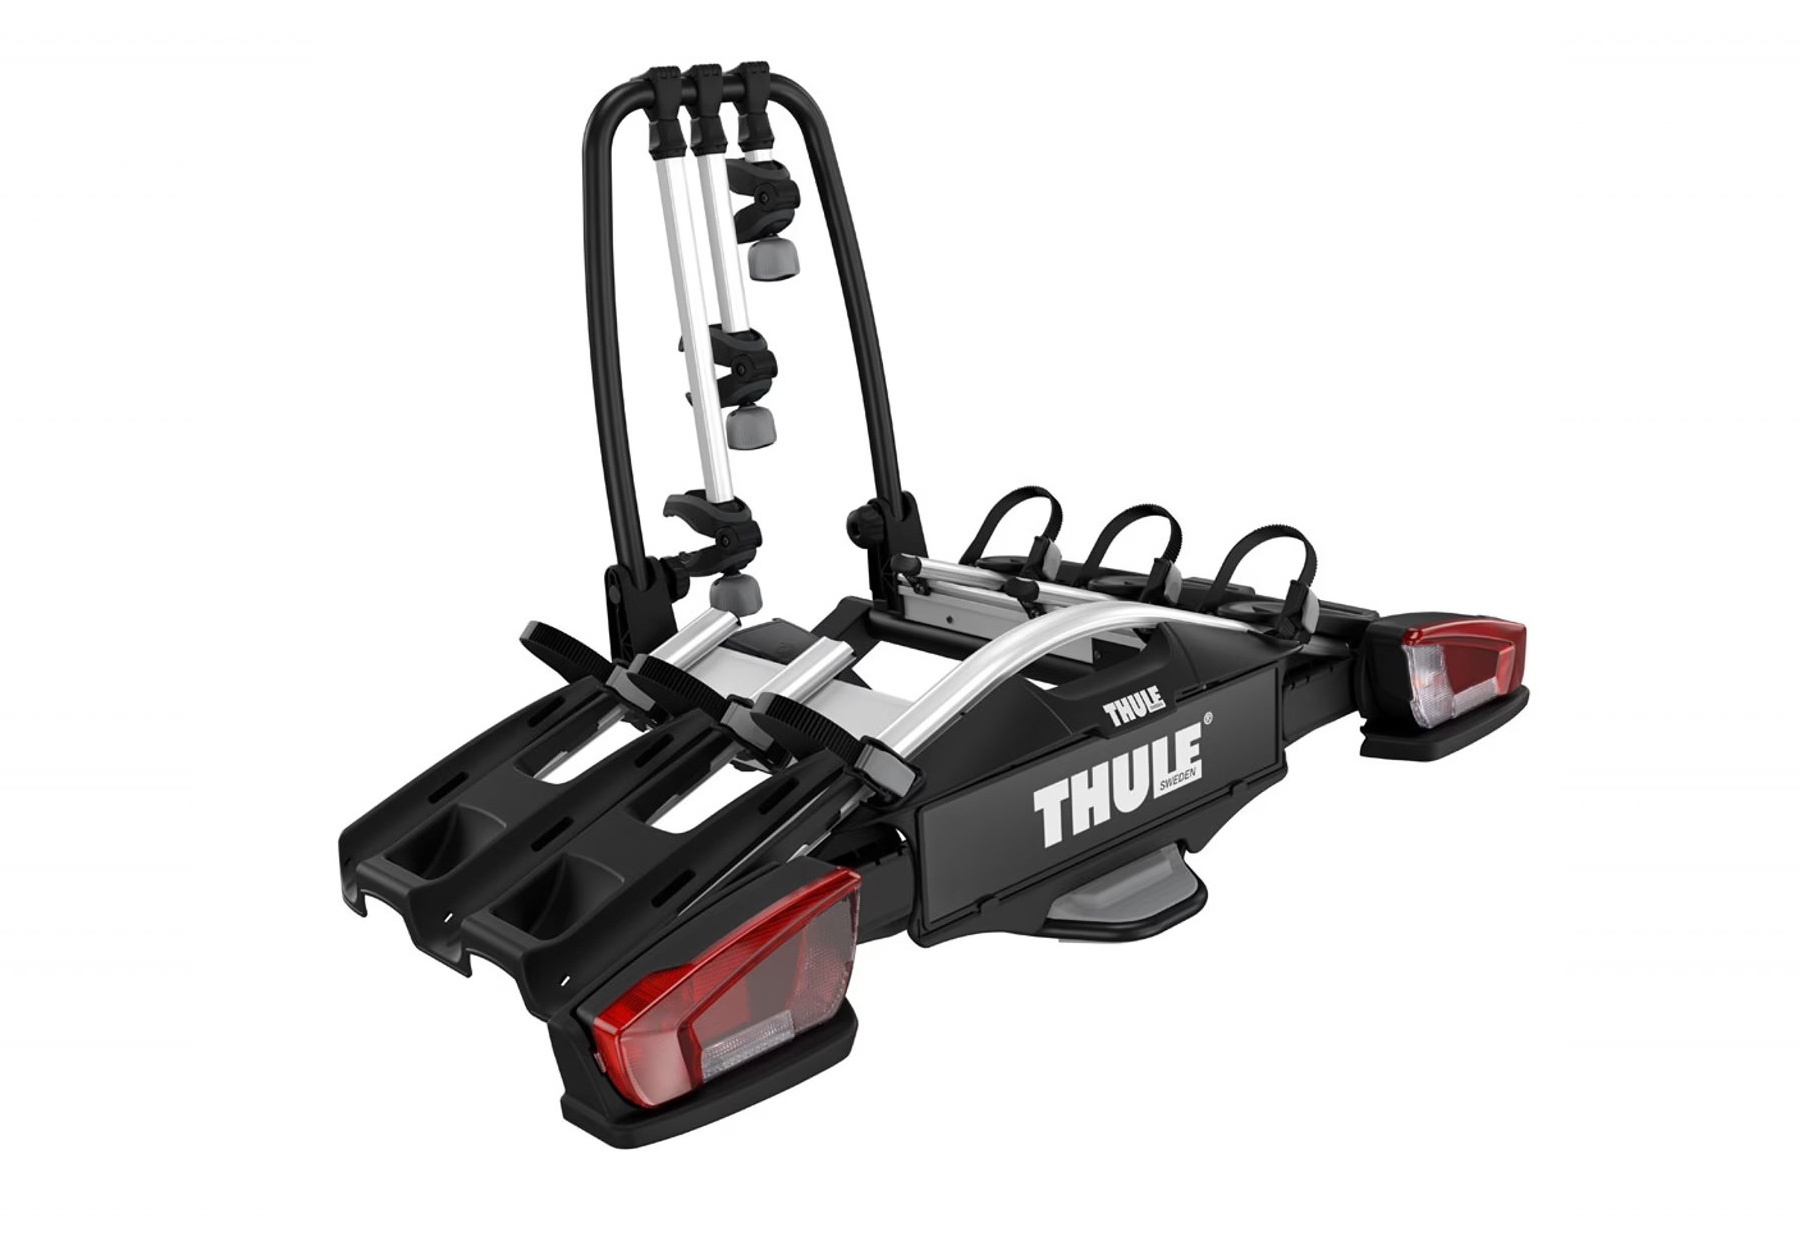 Thule VeloCompact 926 for carrying 3 bikes